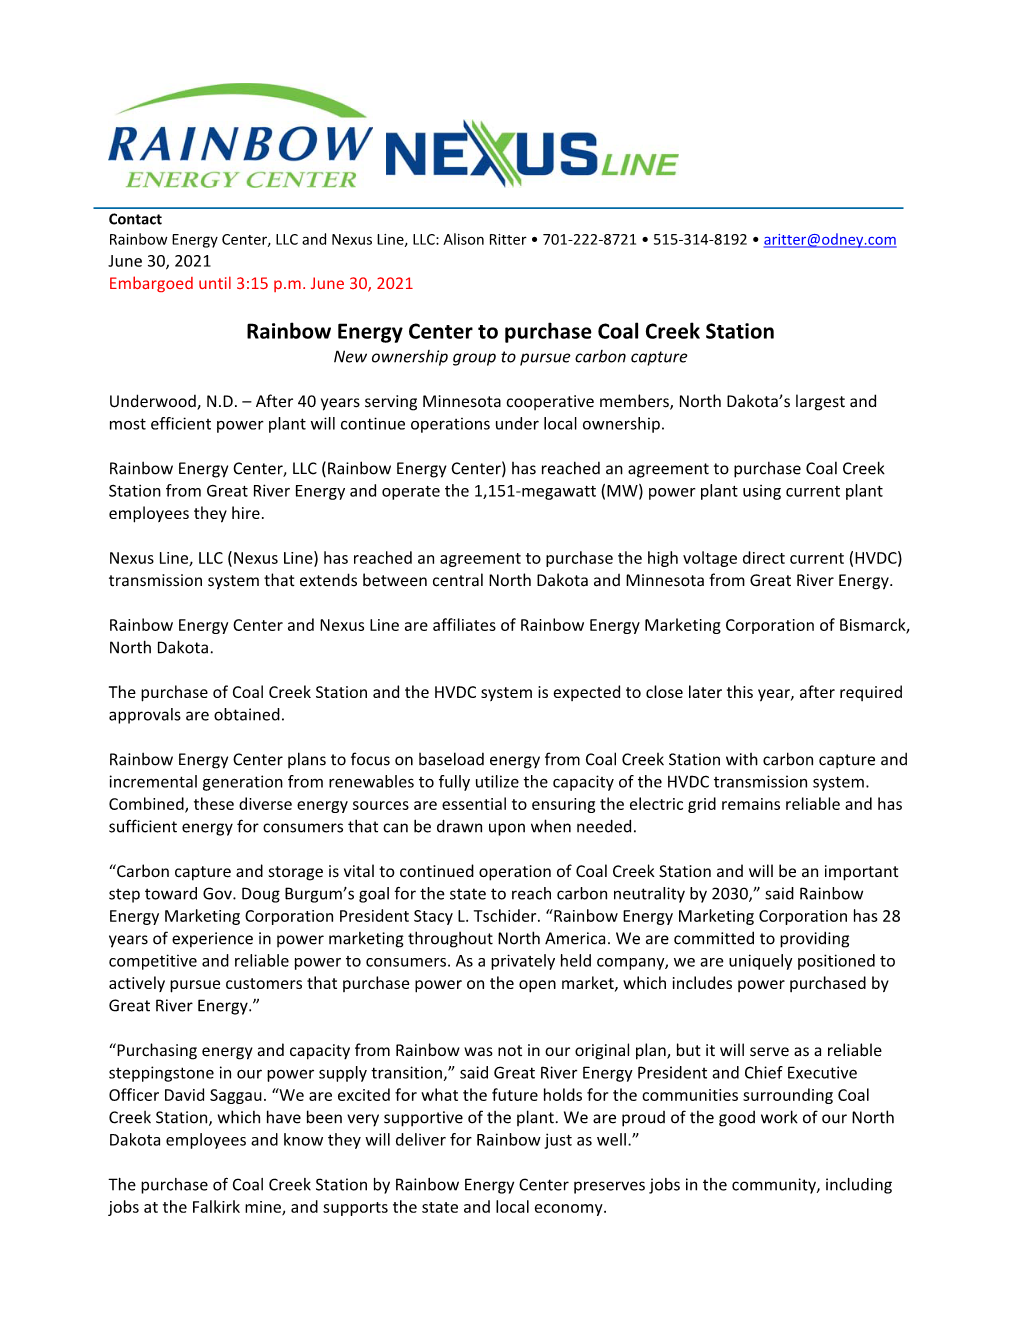 Rainbow Energy Center to Purchase Coal Creek Station New Ownership Group to Pursue Carbon Capture